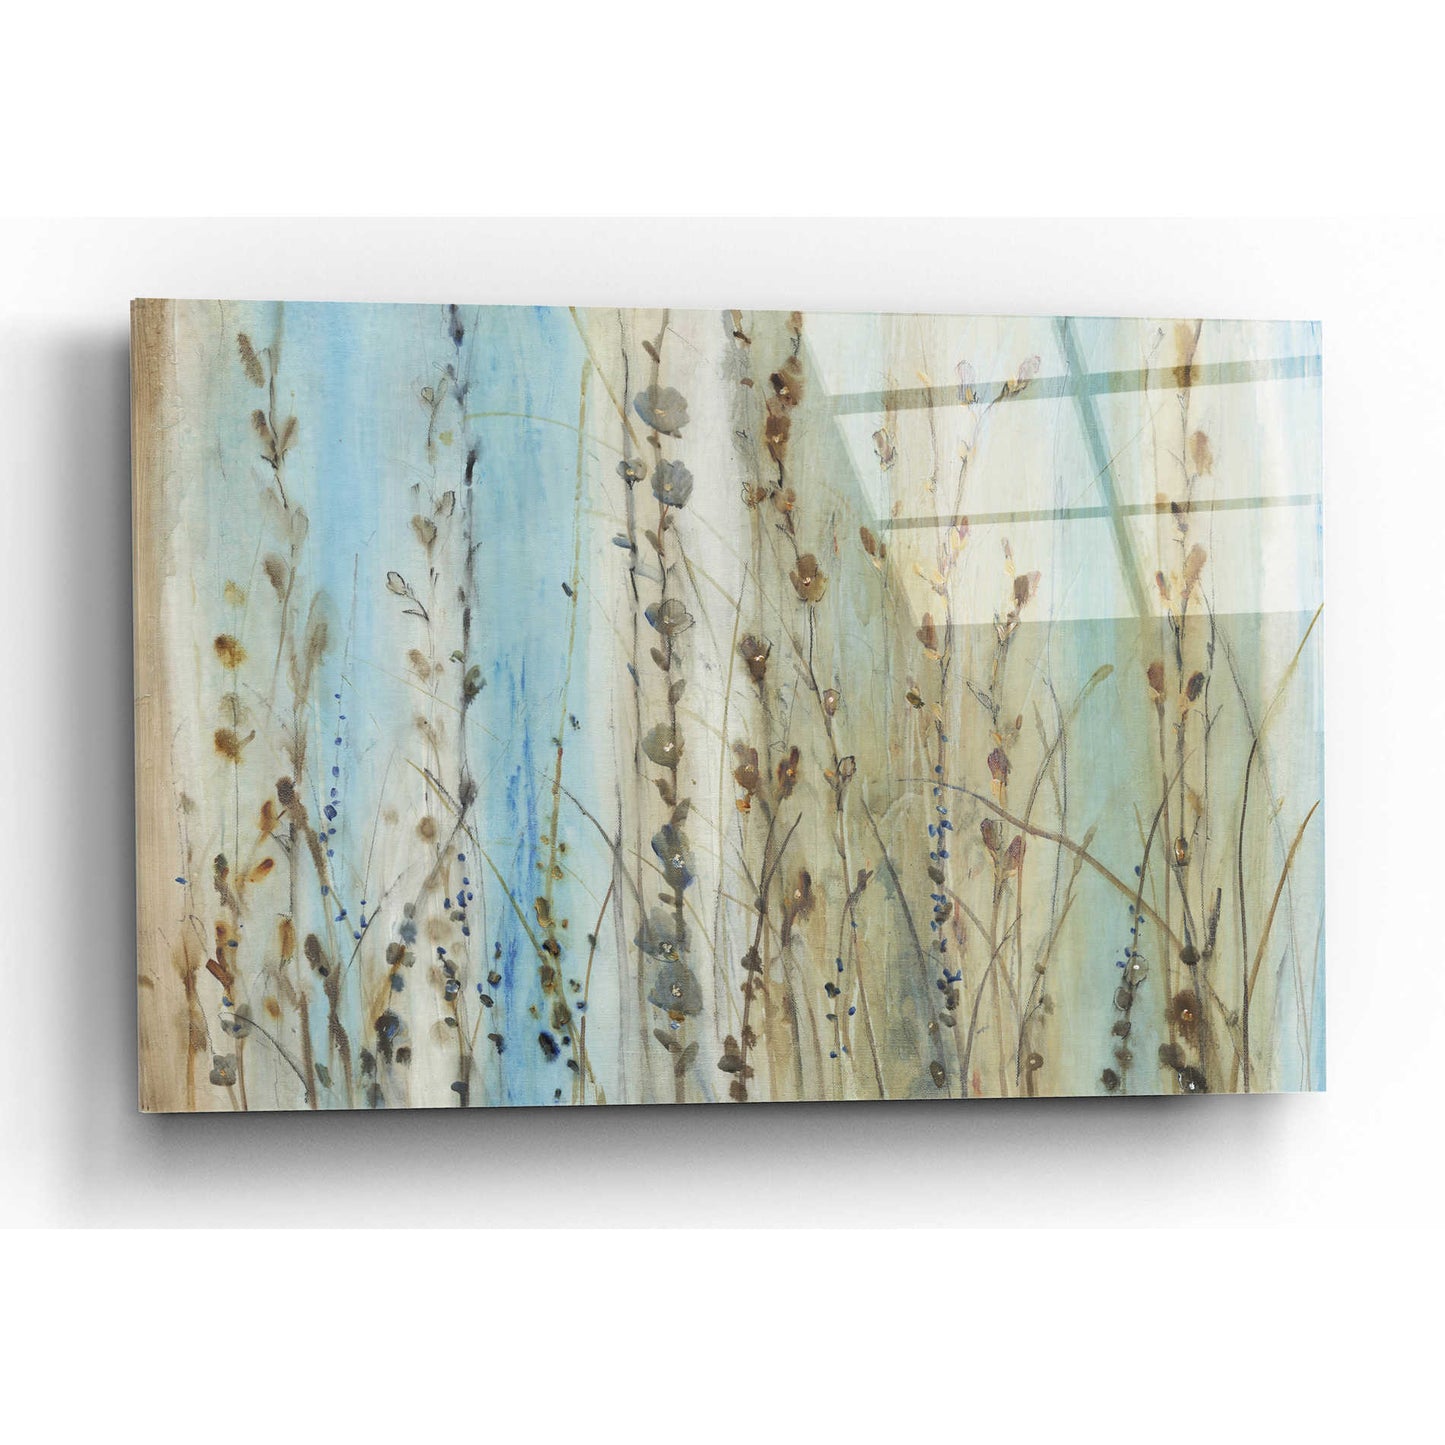 Epic Art 'Ombre Floral I' by Tim O'Toole, Acrylic Glass Wall Art,16x12